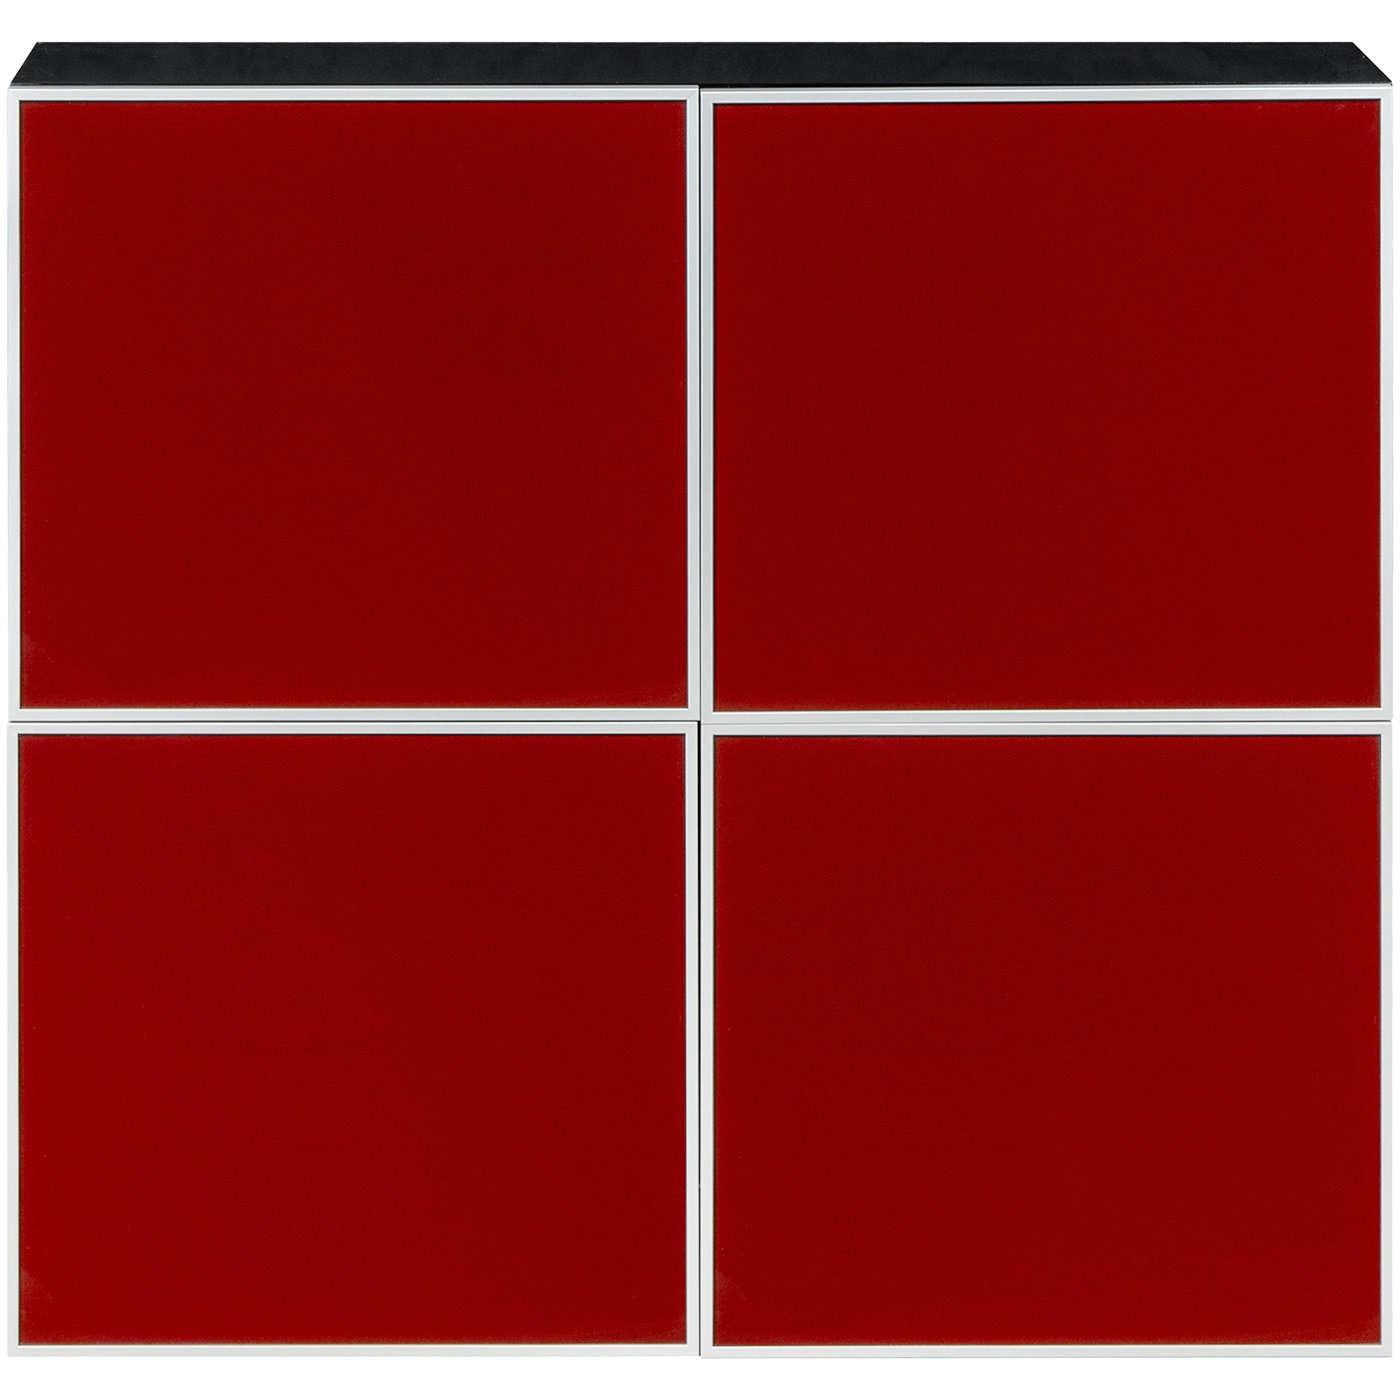 CI 1528 0020 – Set Of 2 Glass Doors Red142Shelf 090 For Wall Black (1)